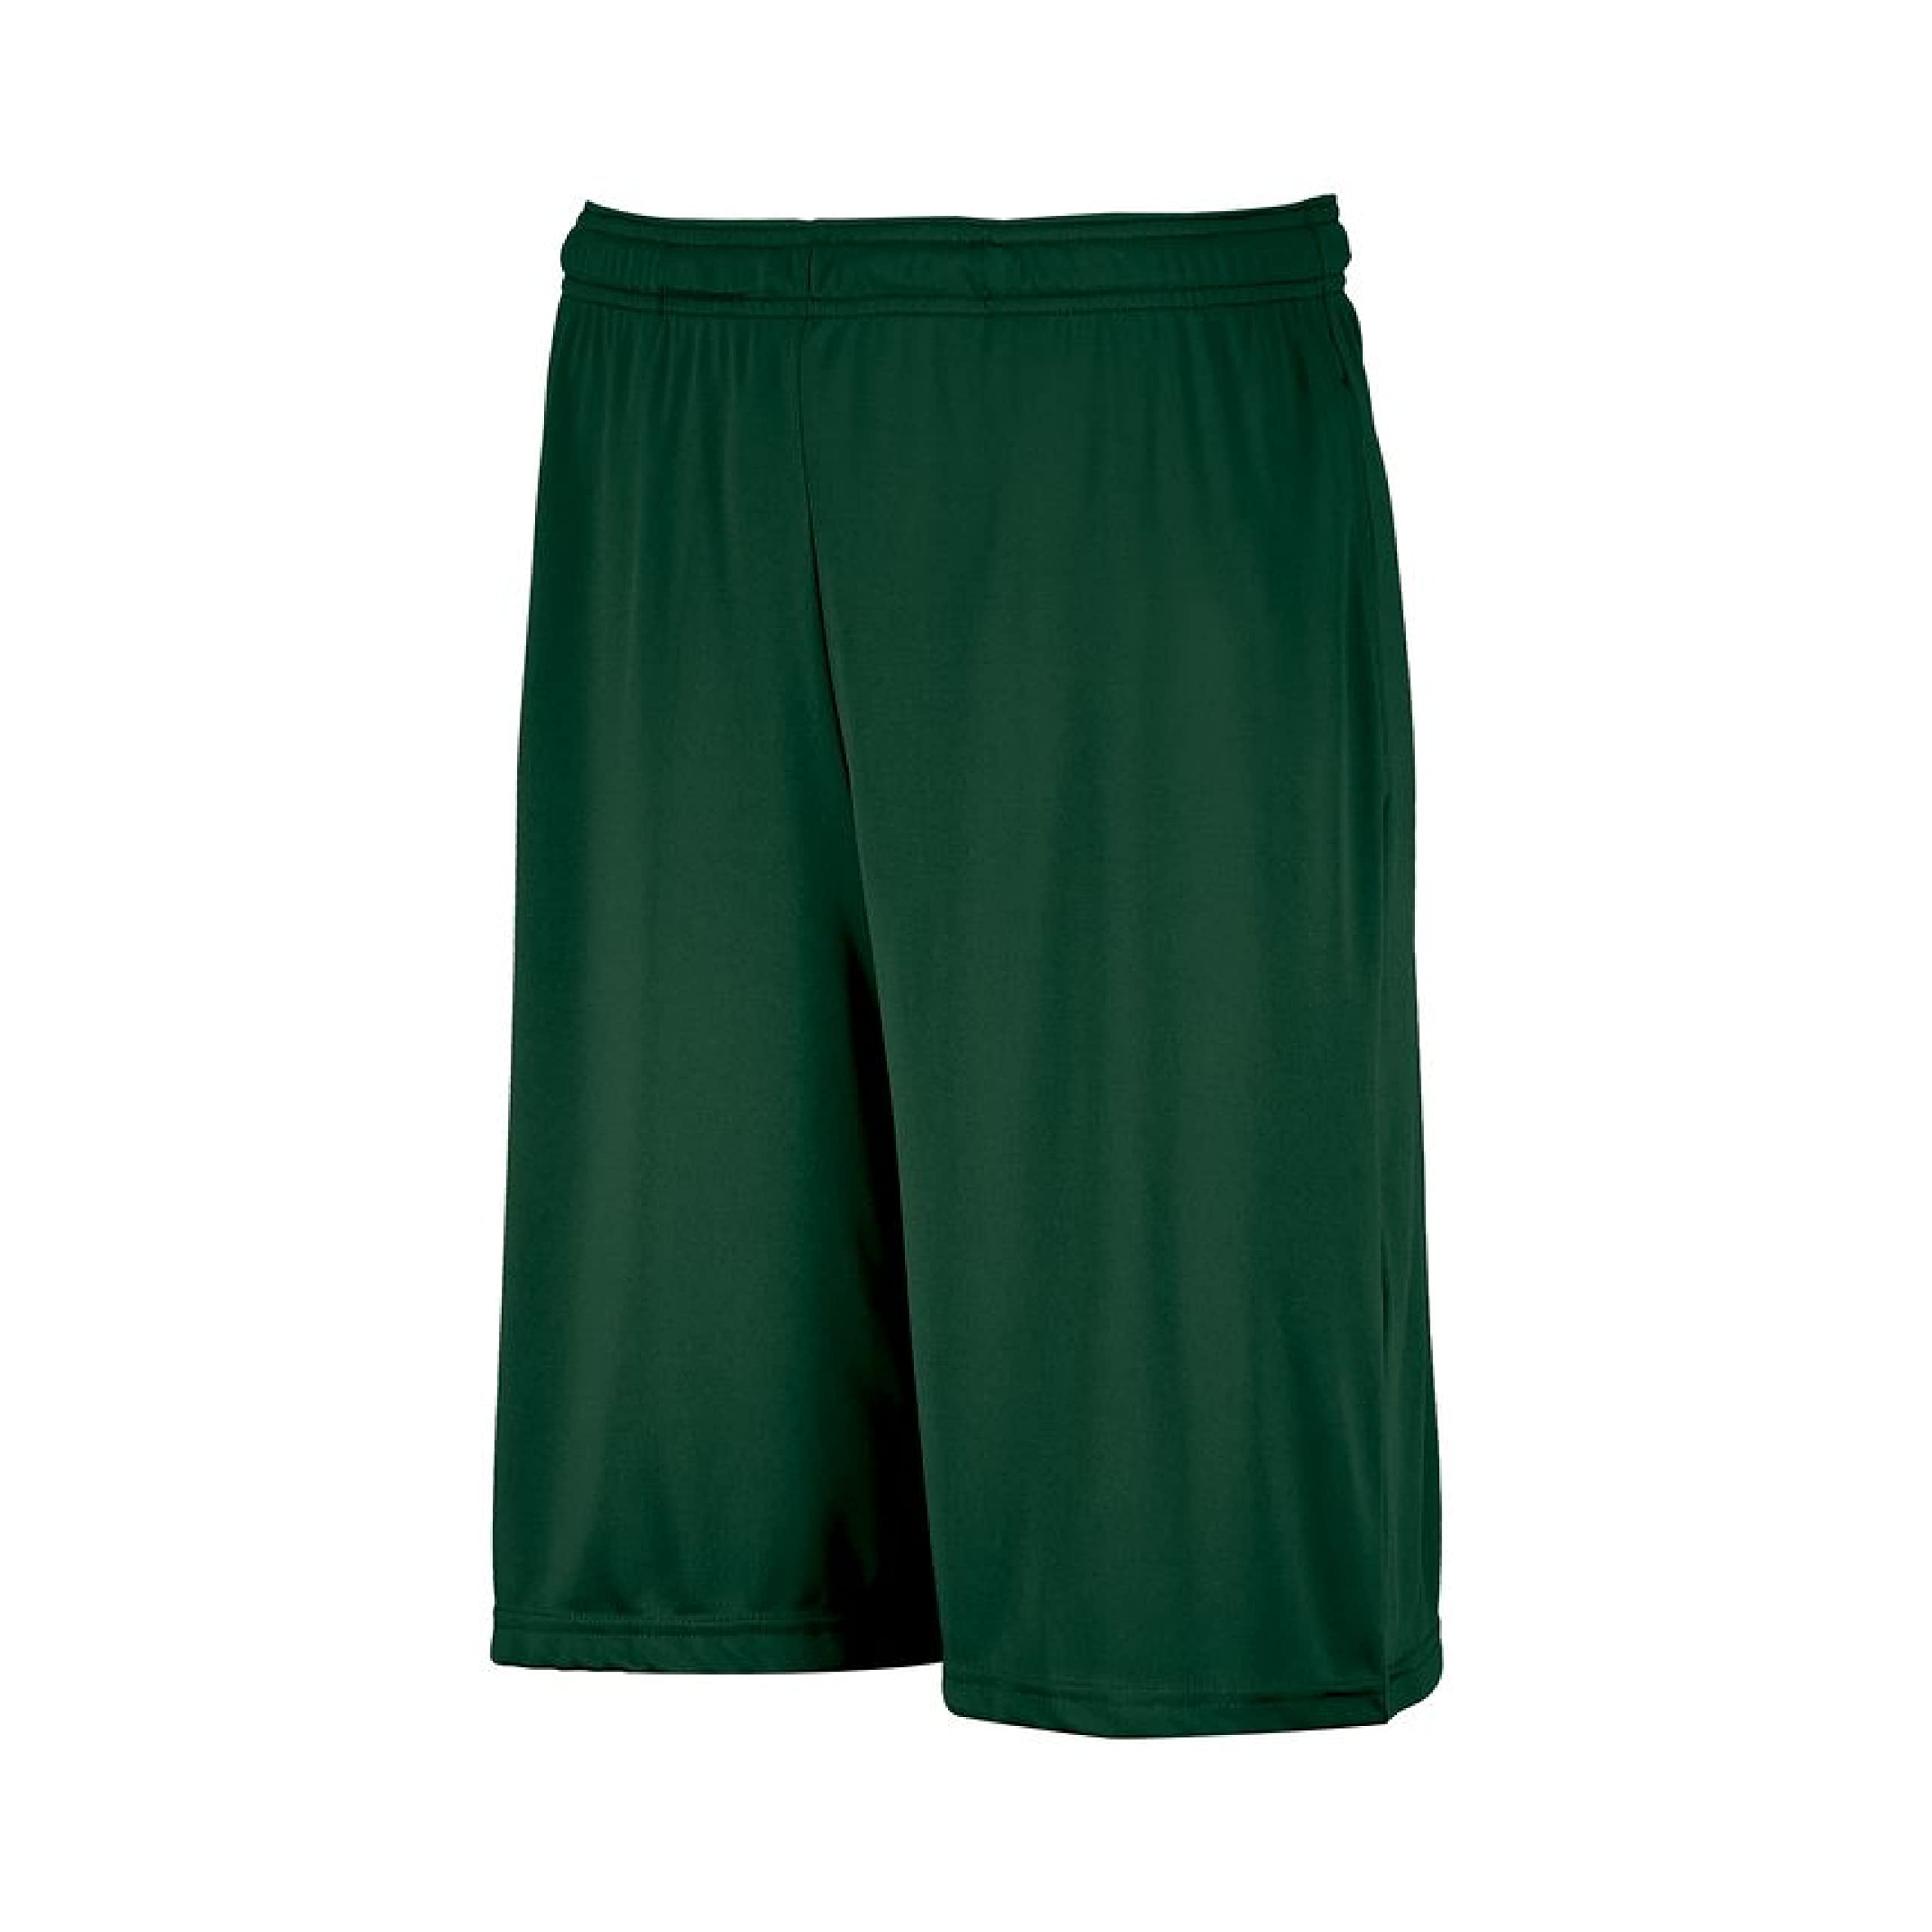 Russell Athletic Boys' Dri-Power Performance Short with Pockets